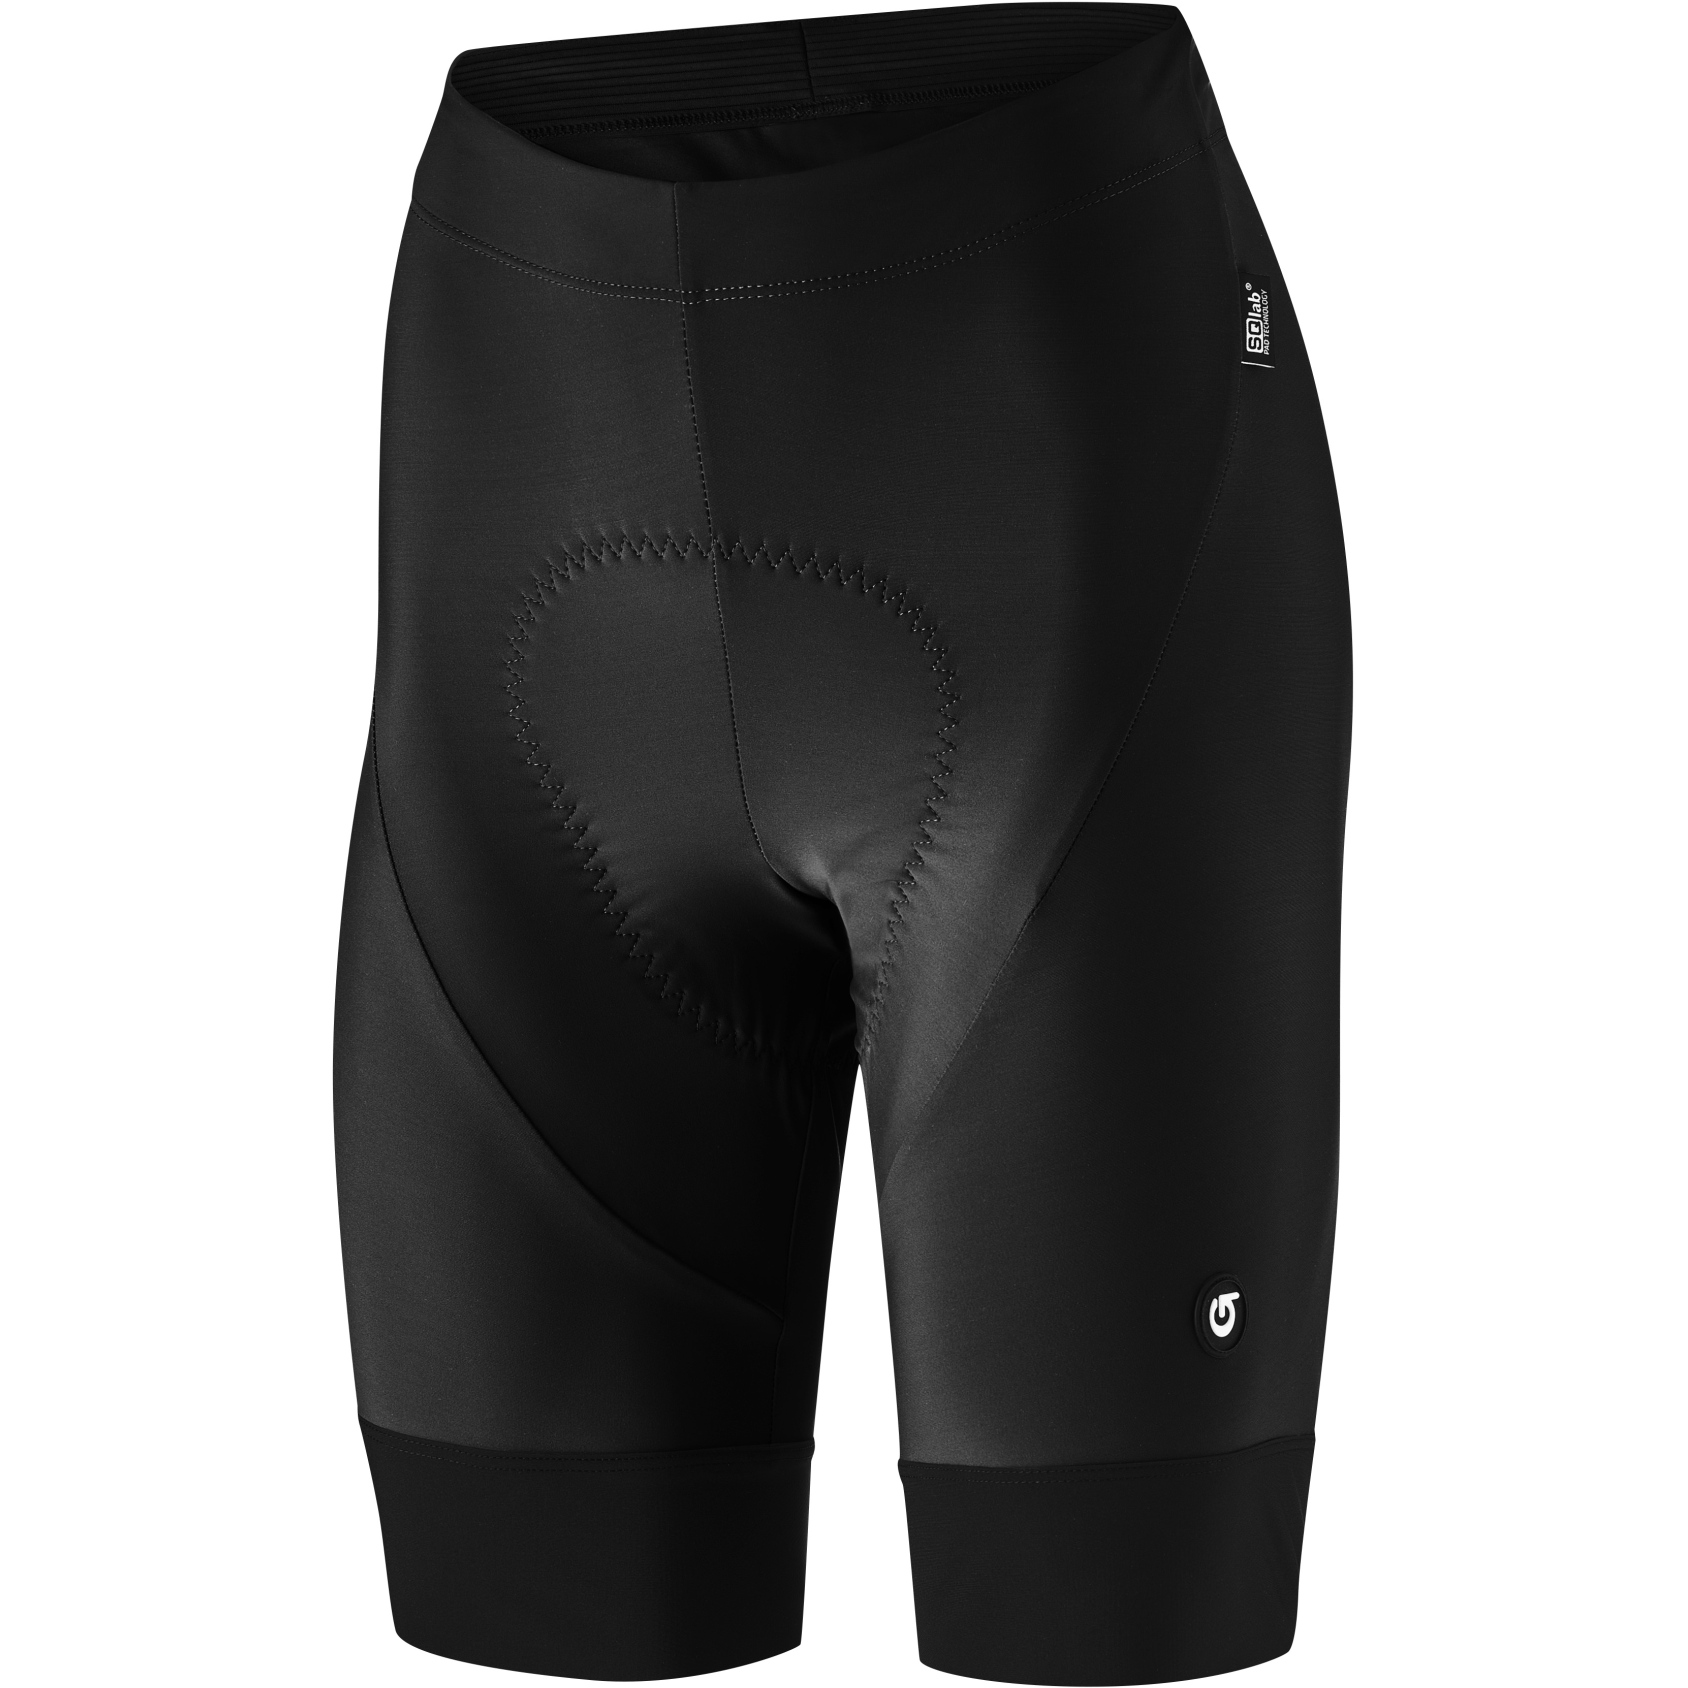 Image of Gonso SQlab GO Cycling Shorts Women - Black